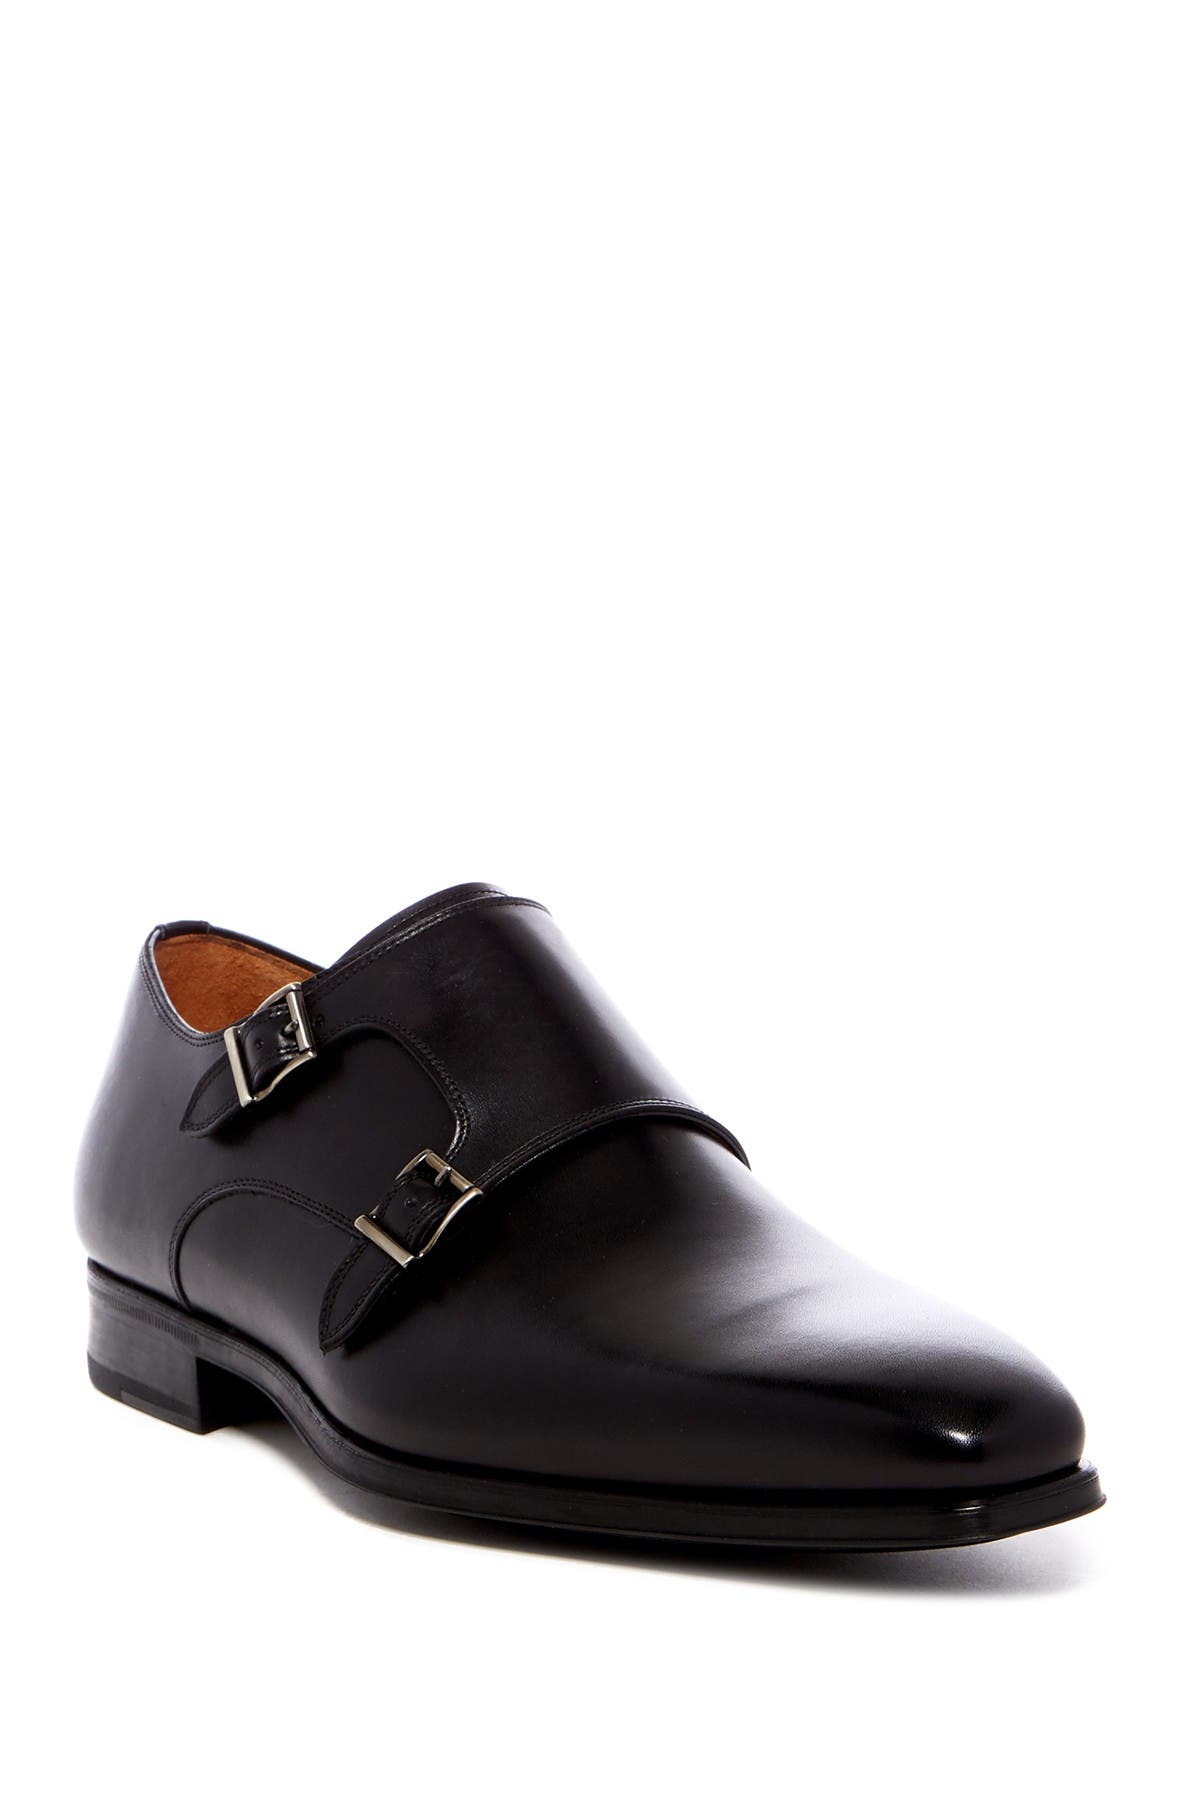 Carmo Leather Double Monk Strap Loafer 